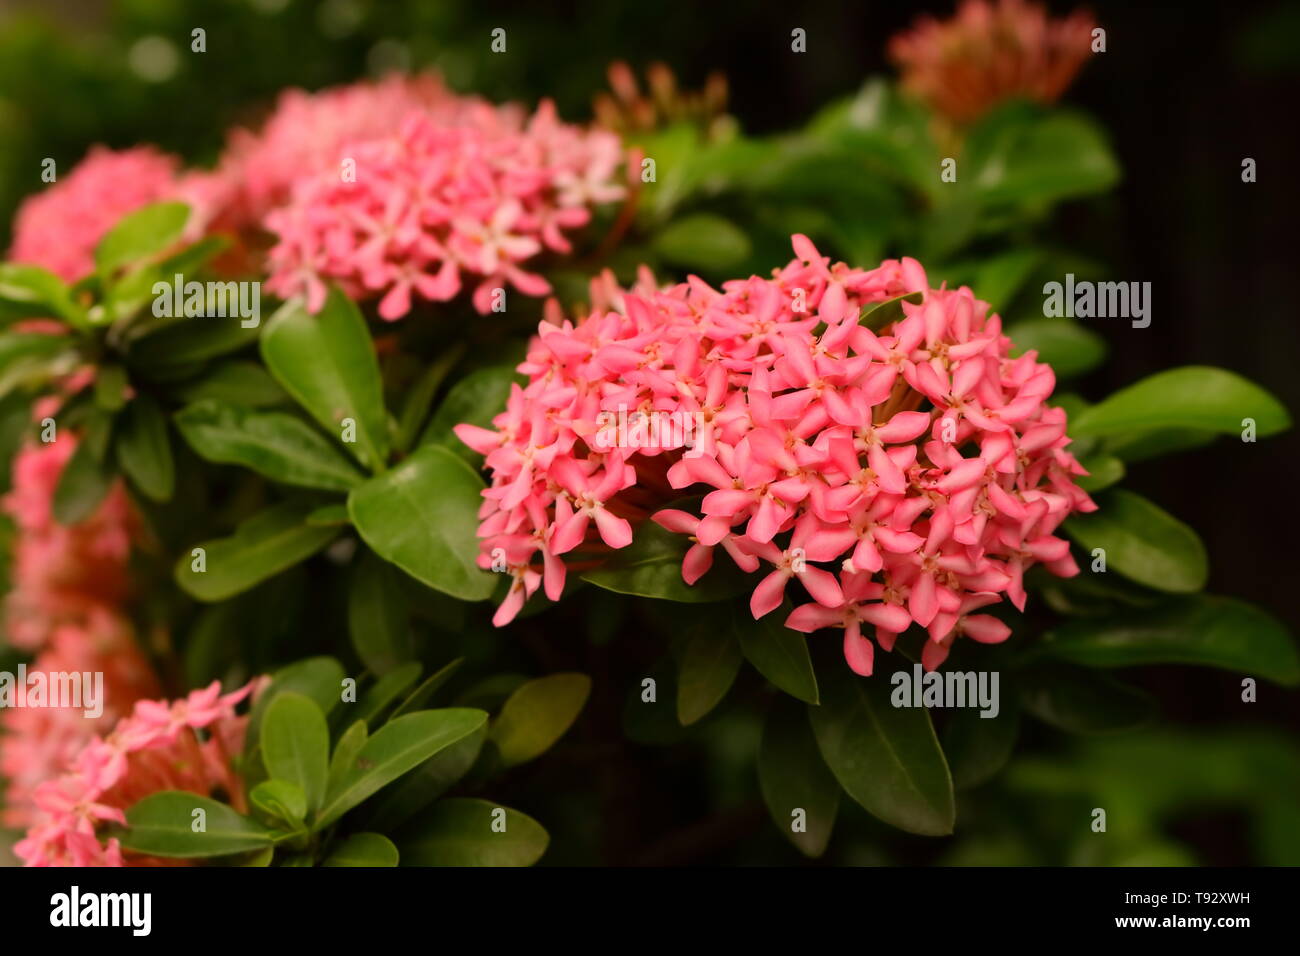 Closeup of pink ixora or spike flowers blooming in garden, selective focus Stock Photo